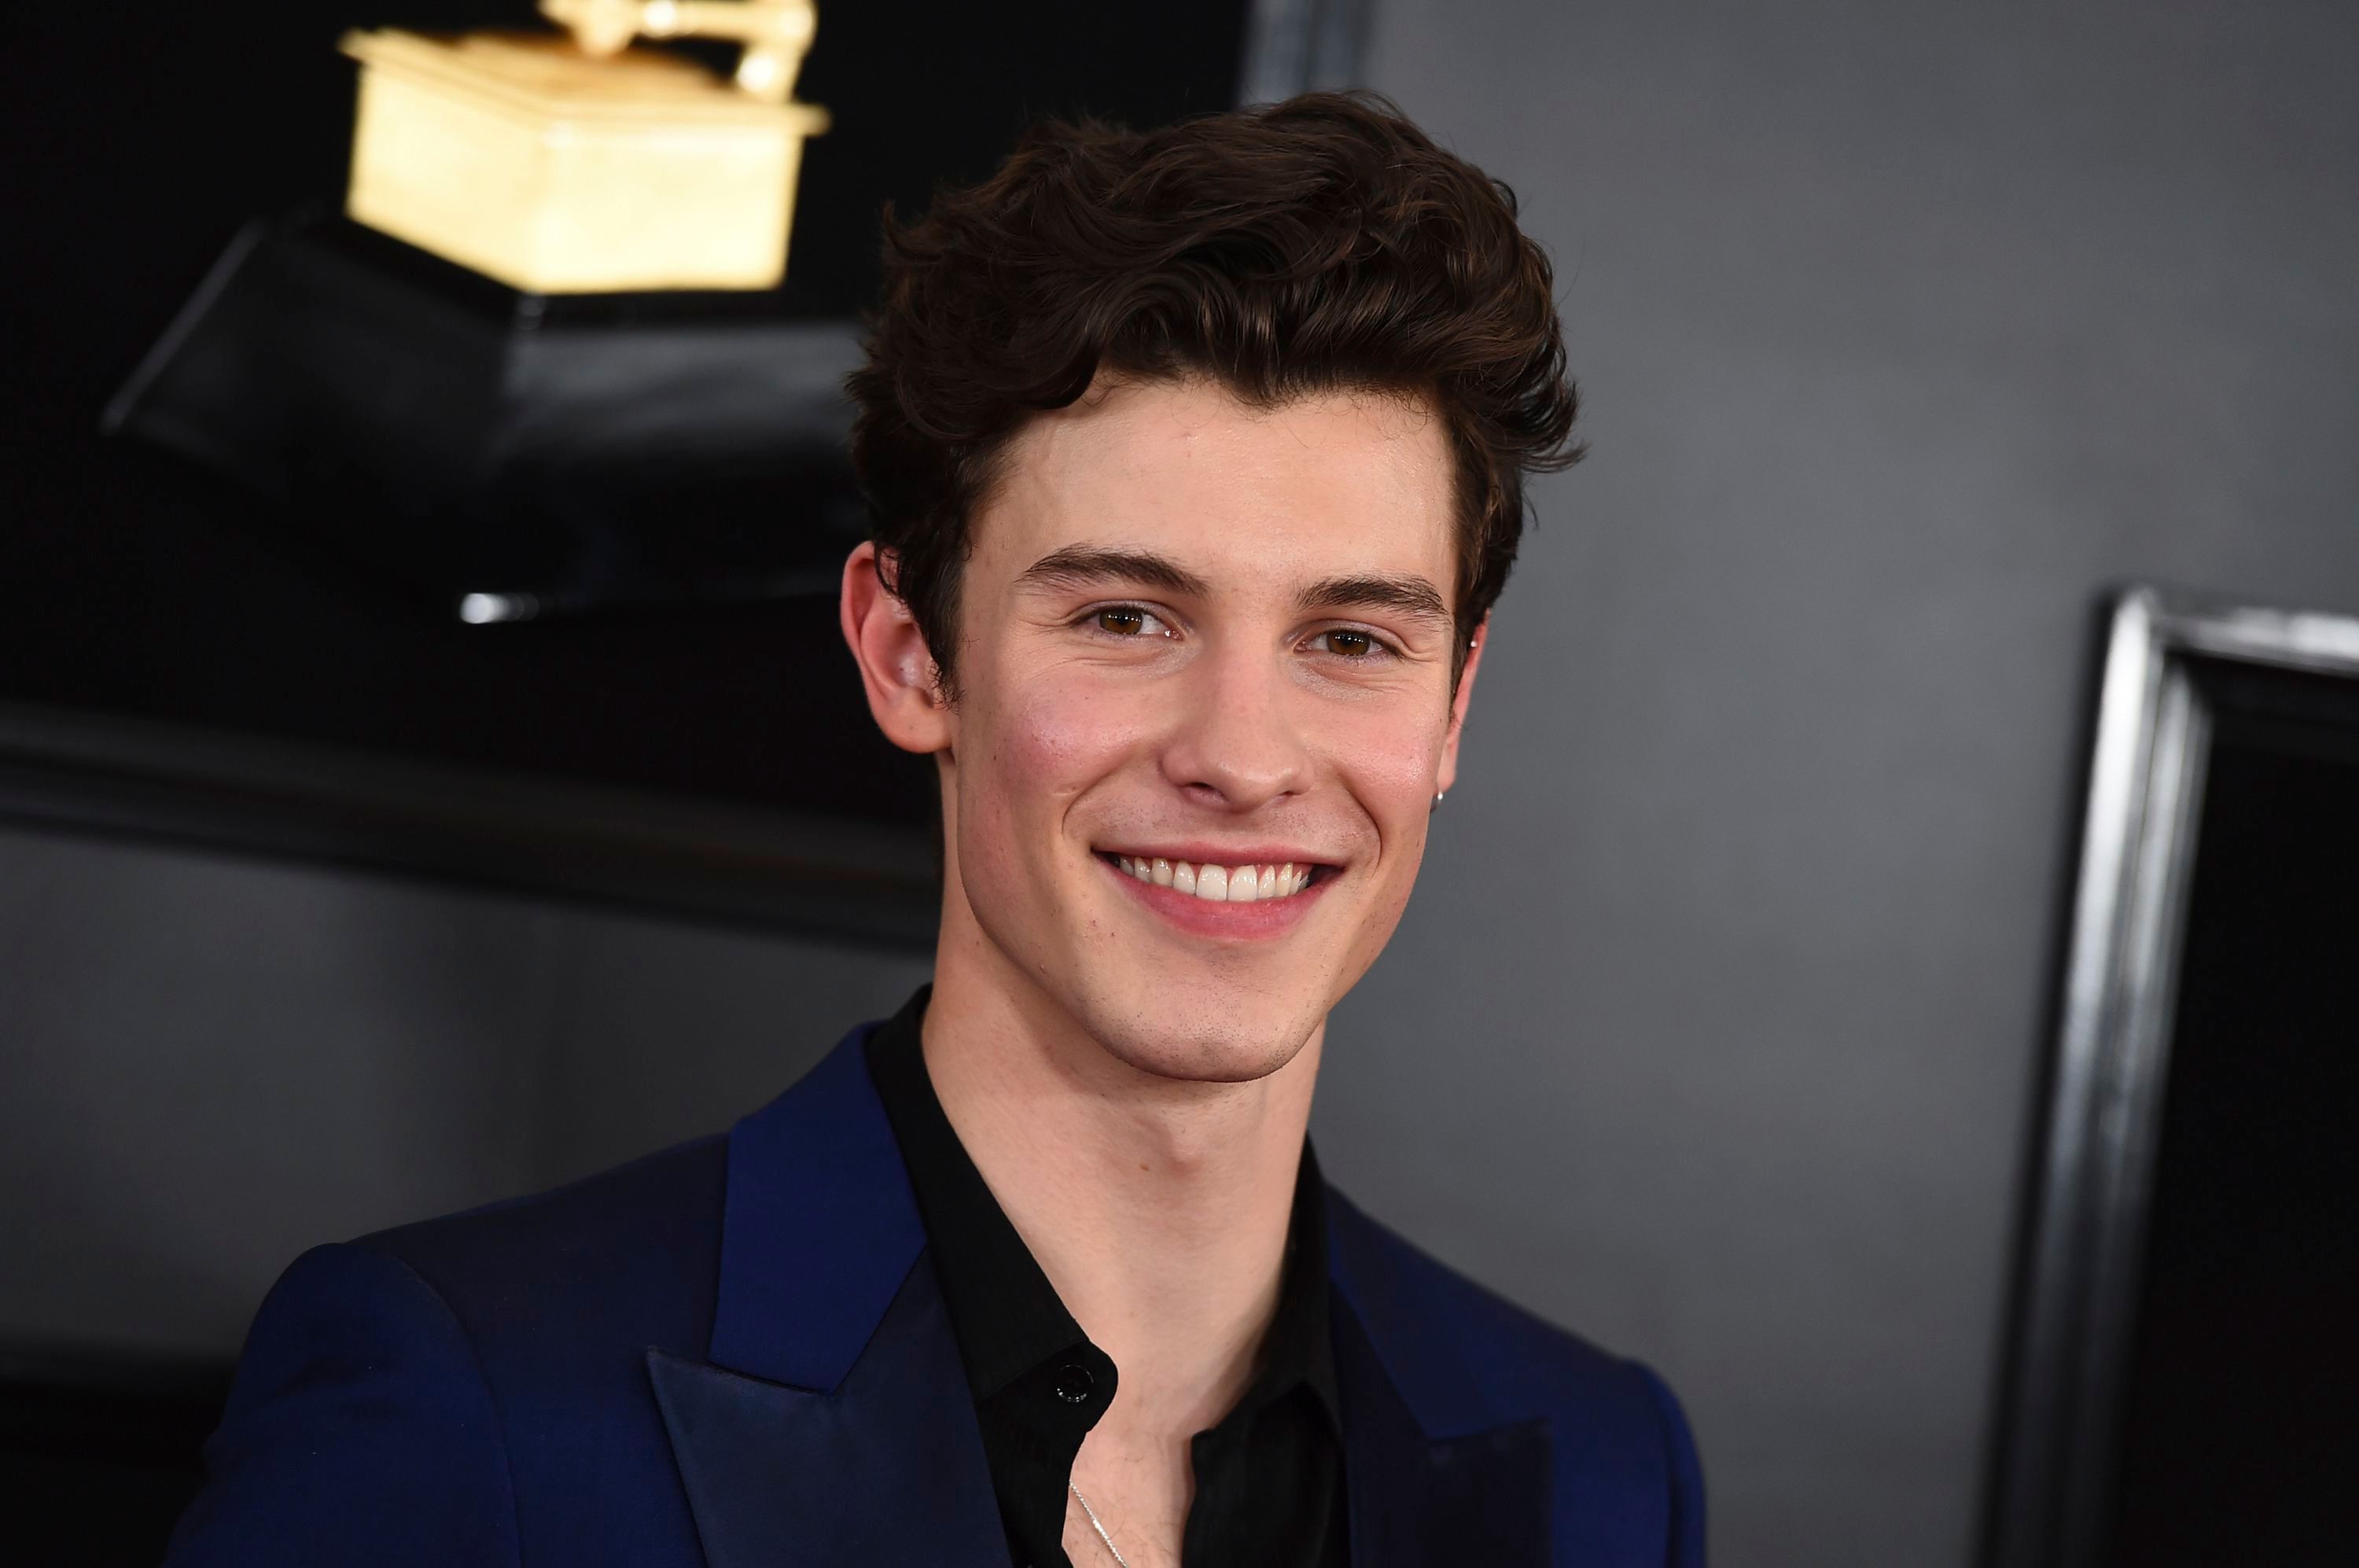 Facts Few People Know About Shawn Mendes Before He Became Famous